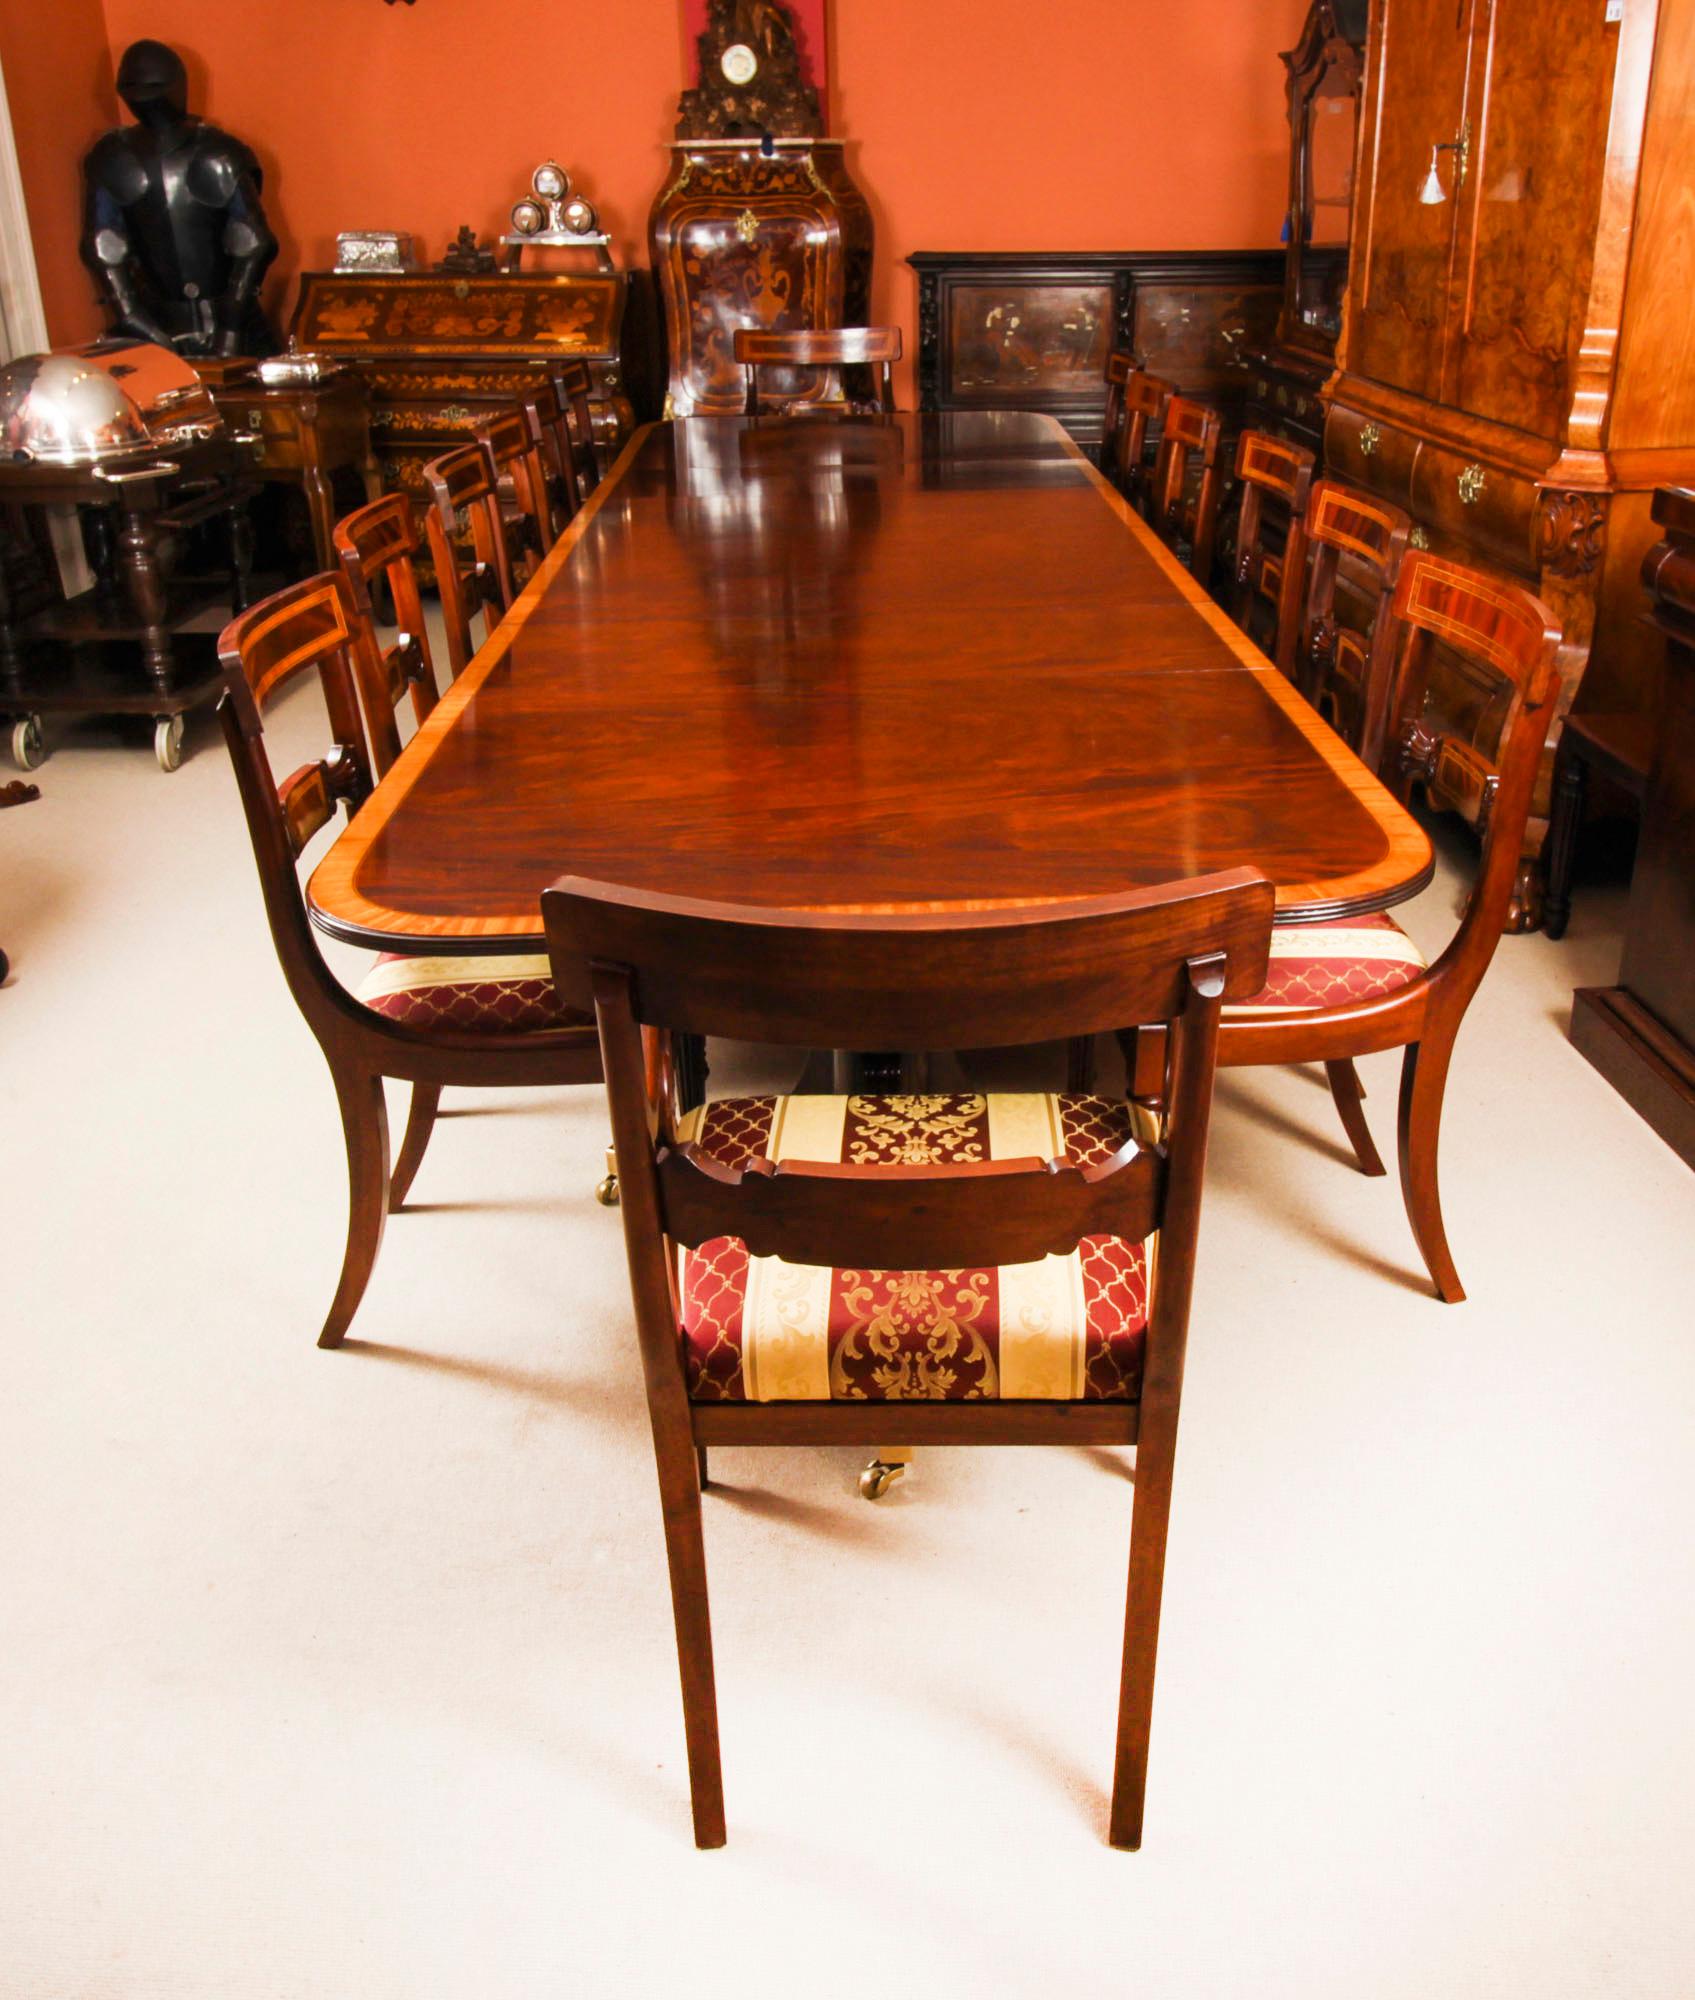 This is a superb dining set comprising a 13ft Vintage Regency Revival dining table  with fourteen Hepplewhite revival dining chairs., dating from the second half of the 20th Century.

The tabletop was crafted in flame mahogany and features superb